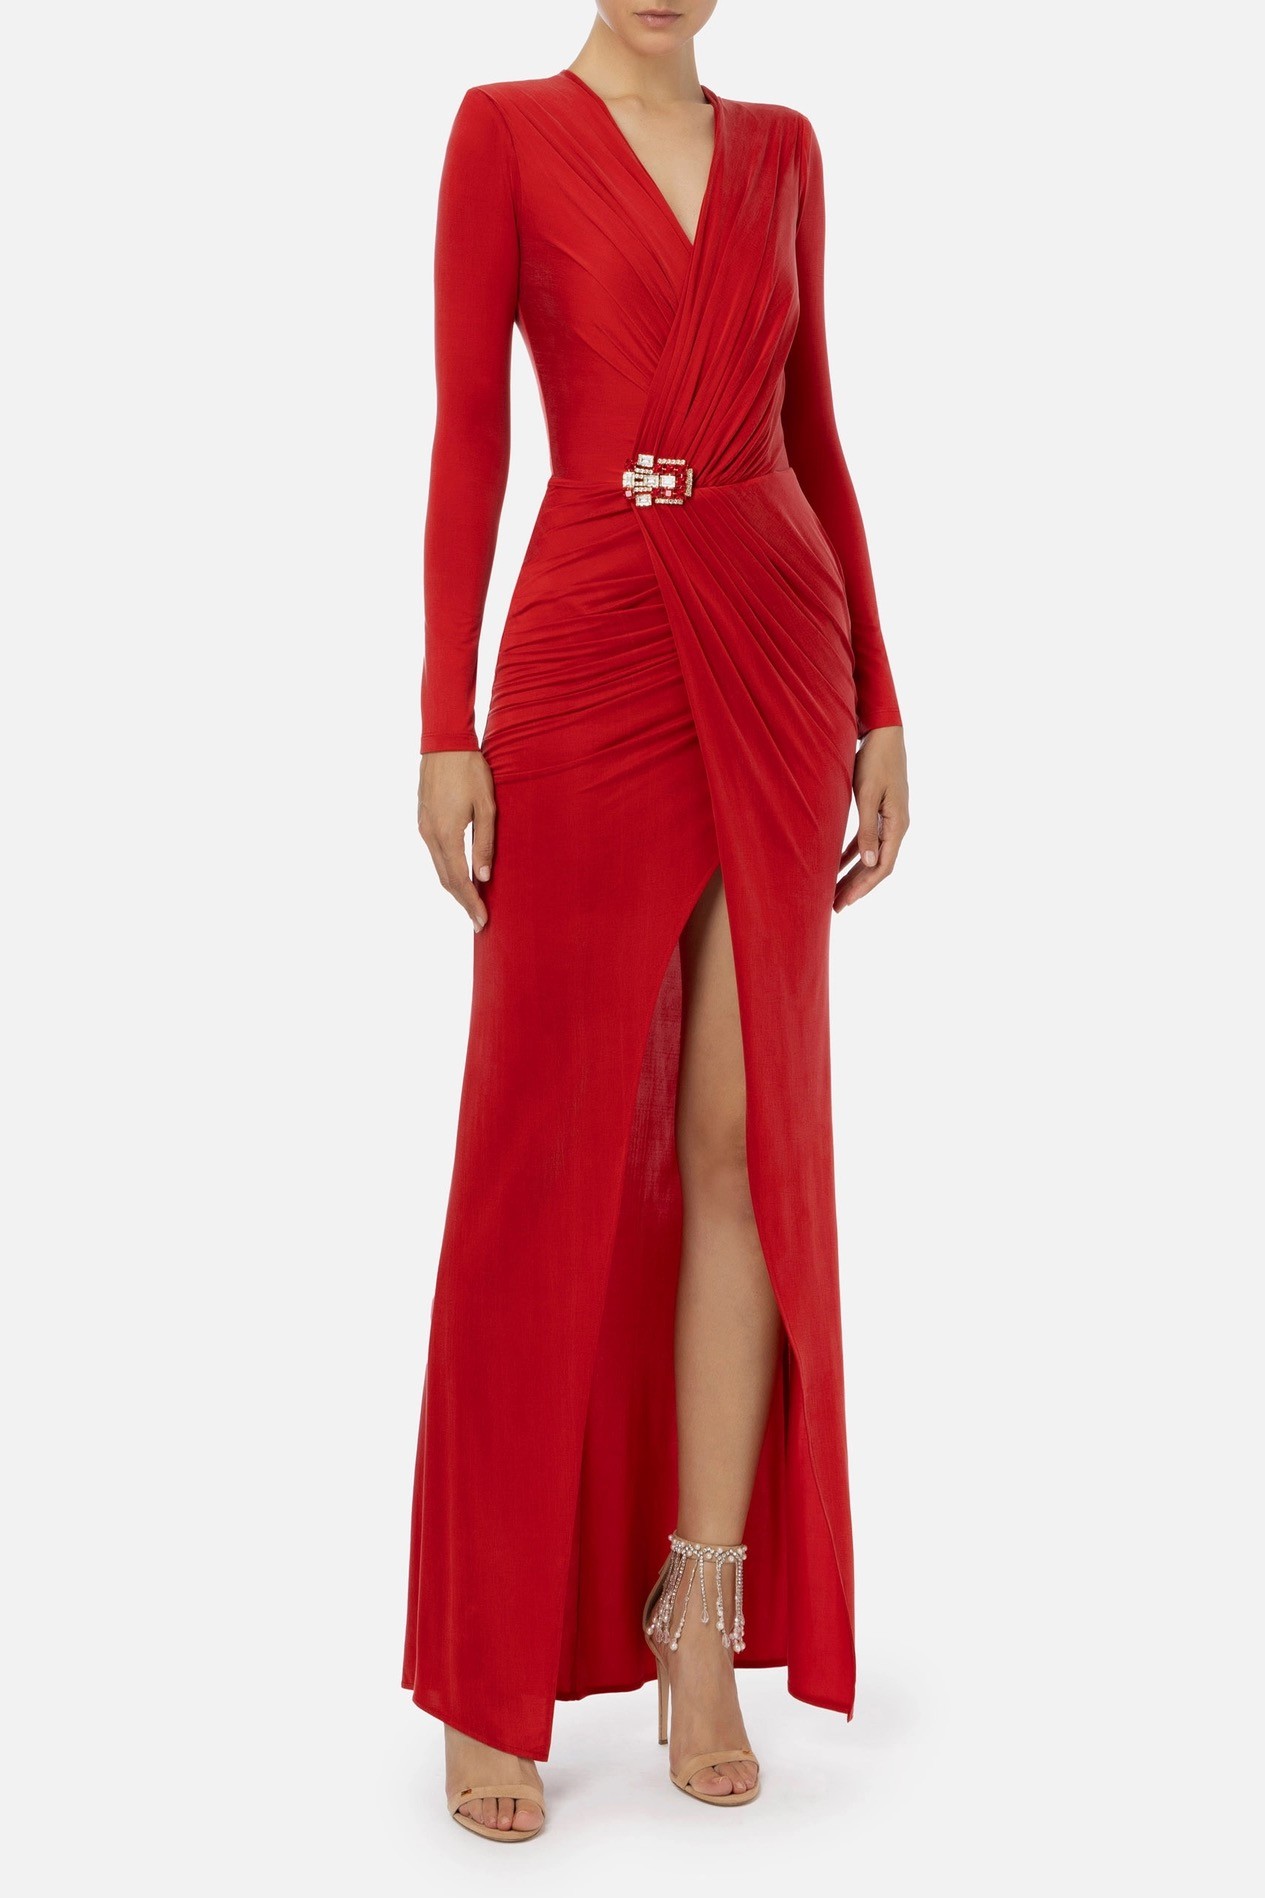 Elisabetta Franchi - Red Carpet dress in cupro jersey with accessory - red